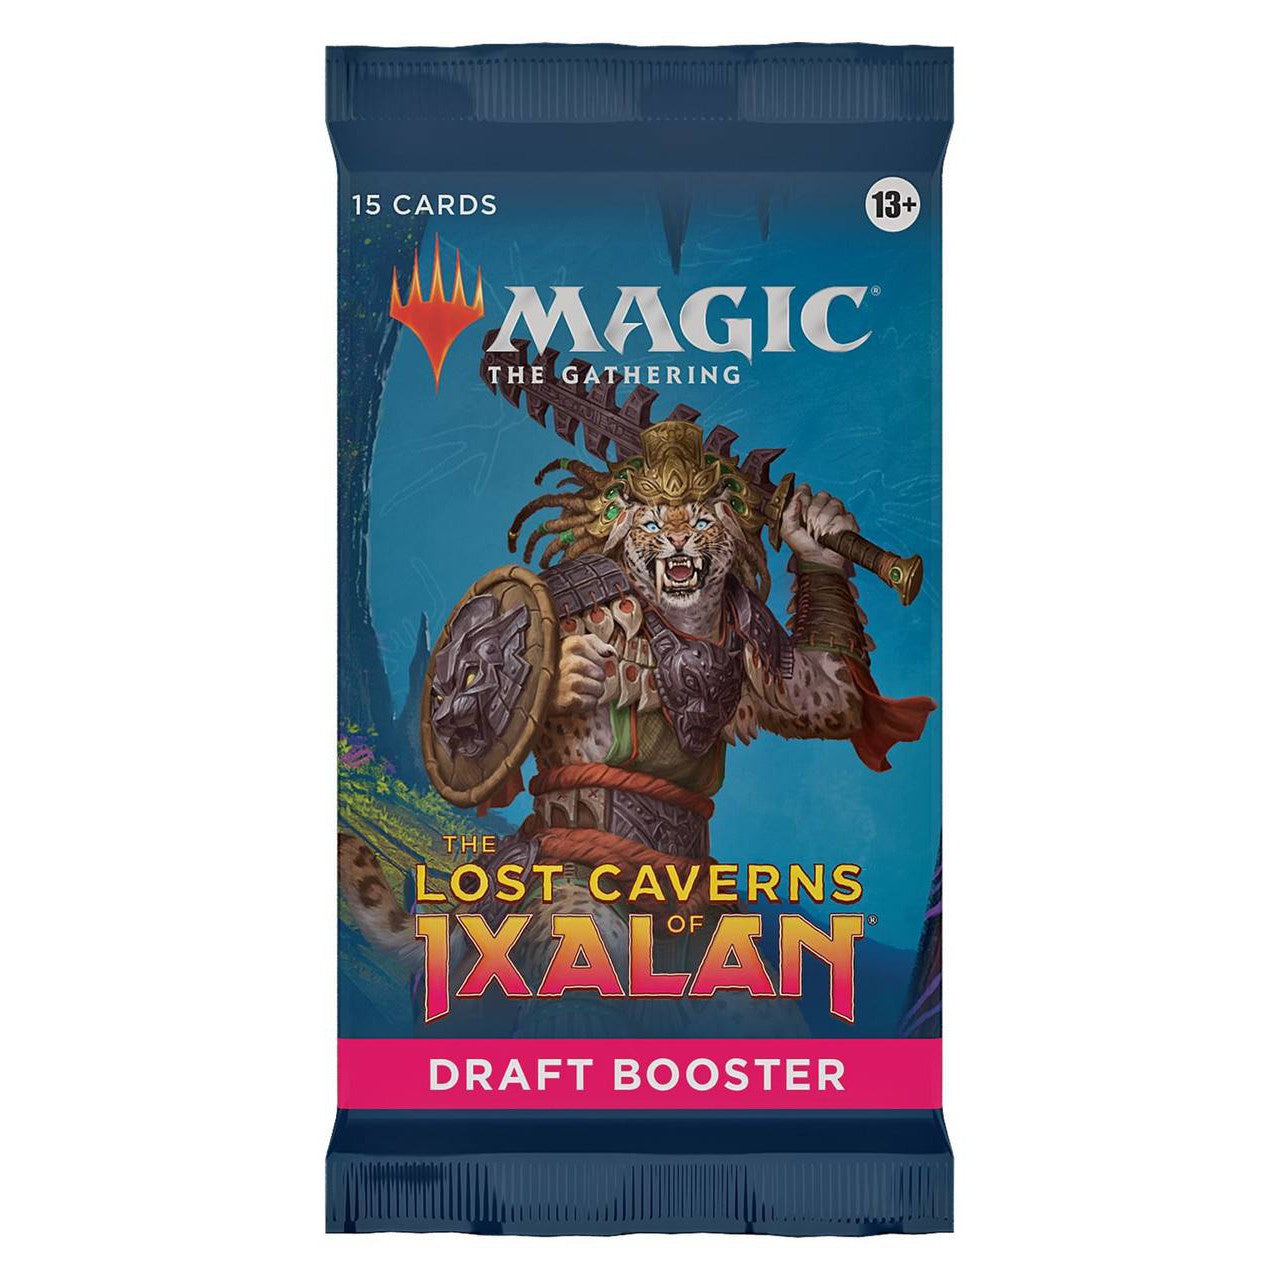 Magic the Gathering: The Lost Caverns of Ixalan draft boosterpack